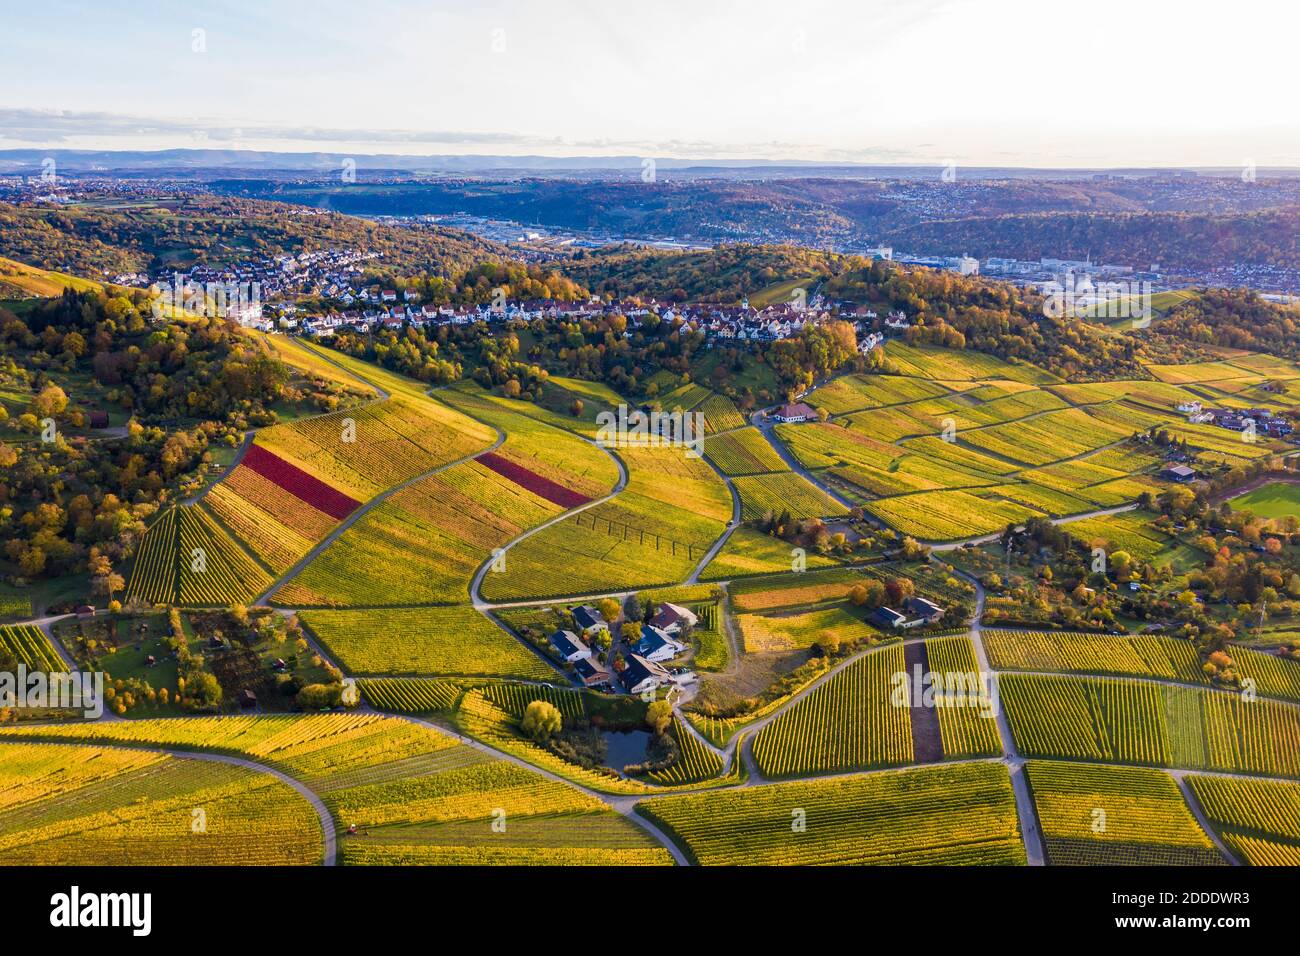 Germany, Baden-Wurttemberg, Rotenberg, Aerial view of vast countryside vineyards at autumn dusk Stock Photo